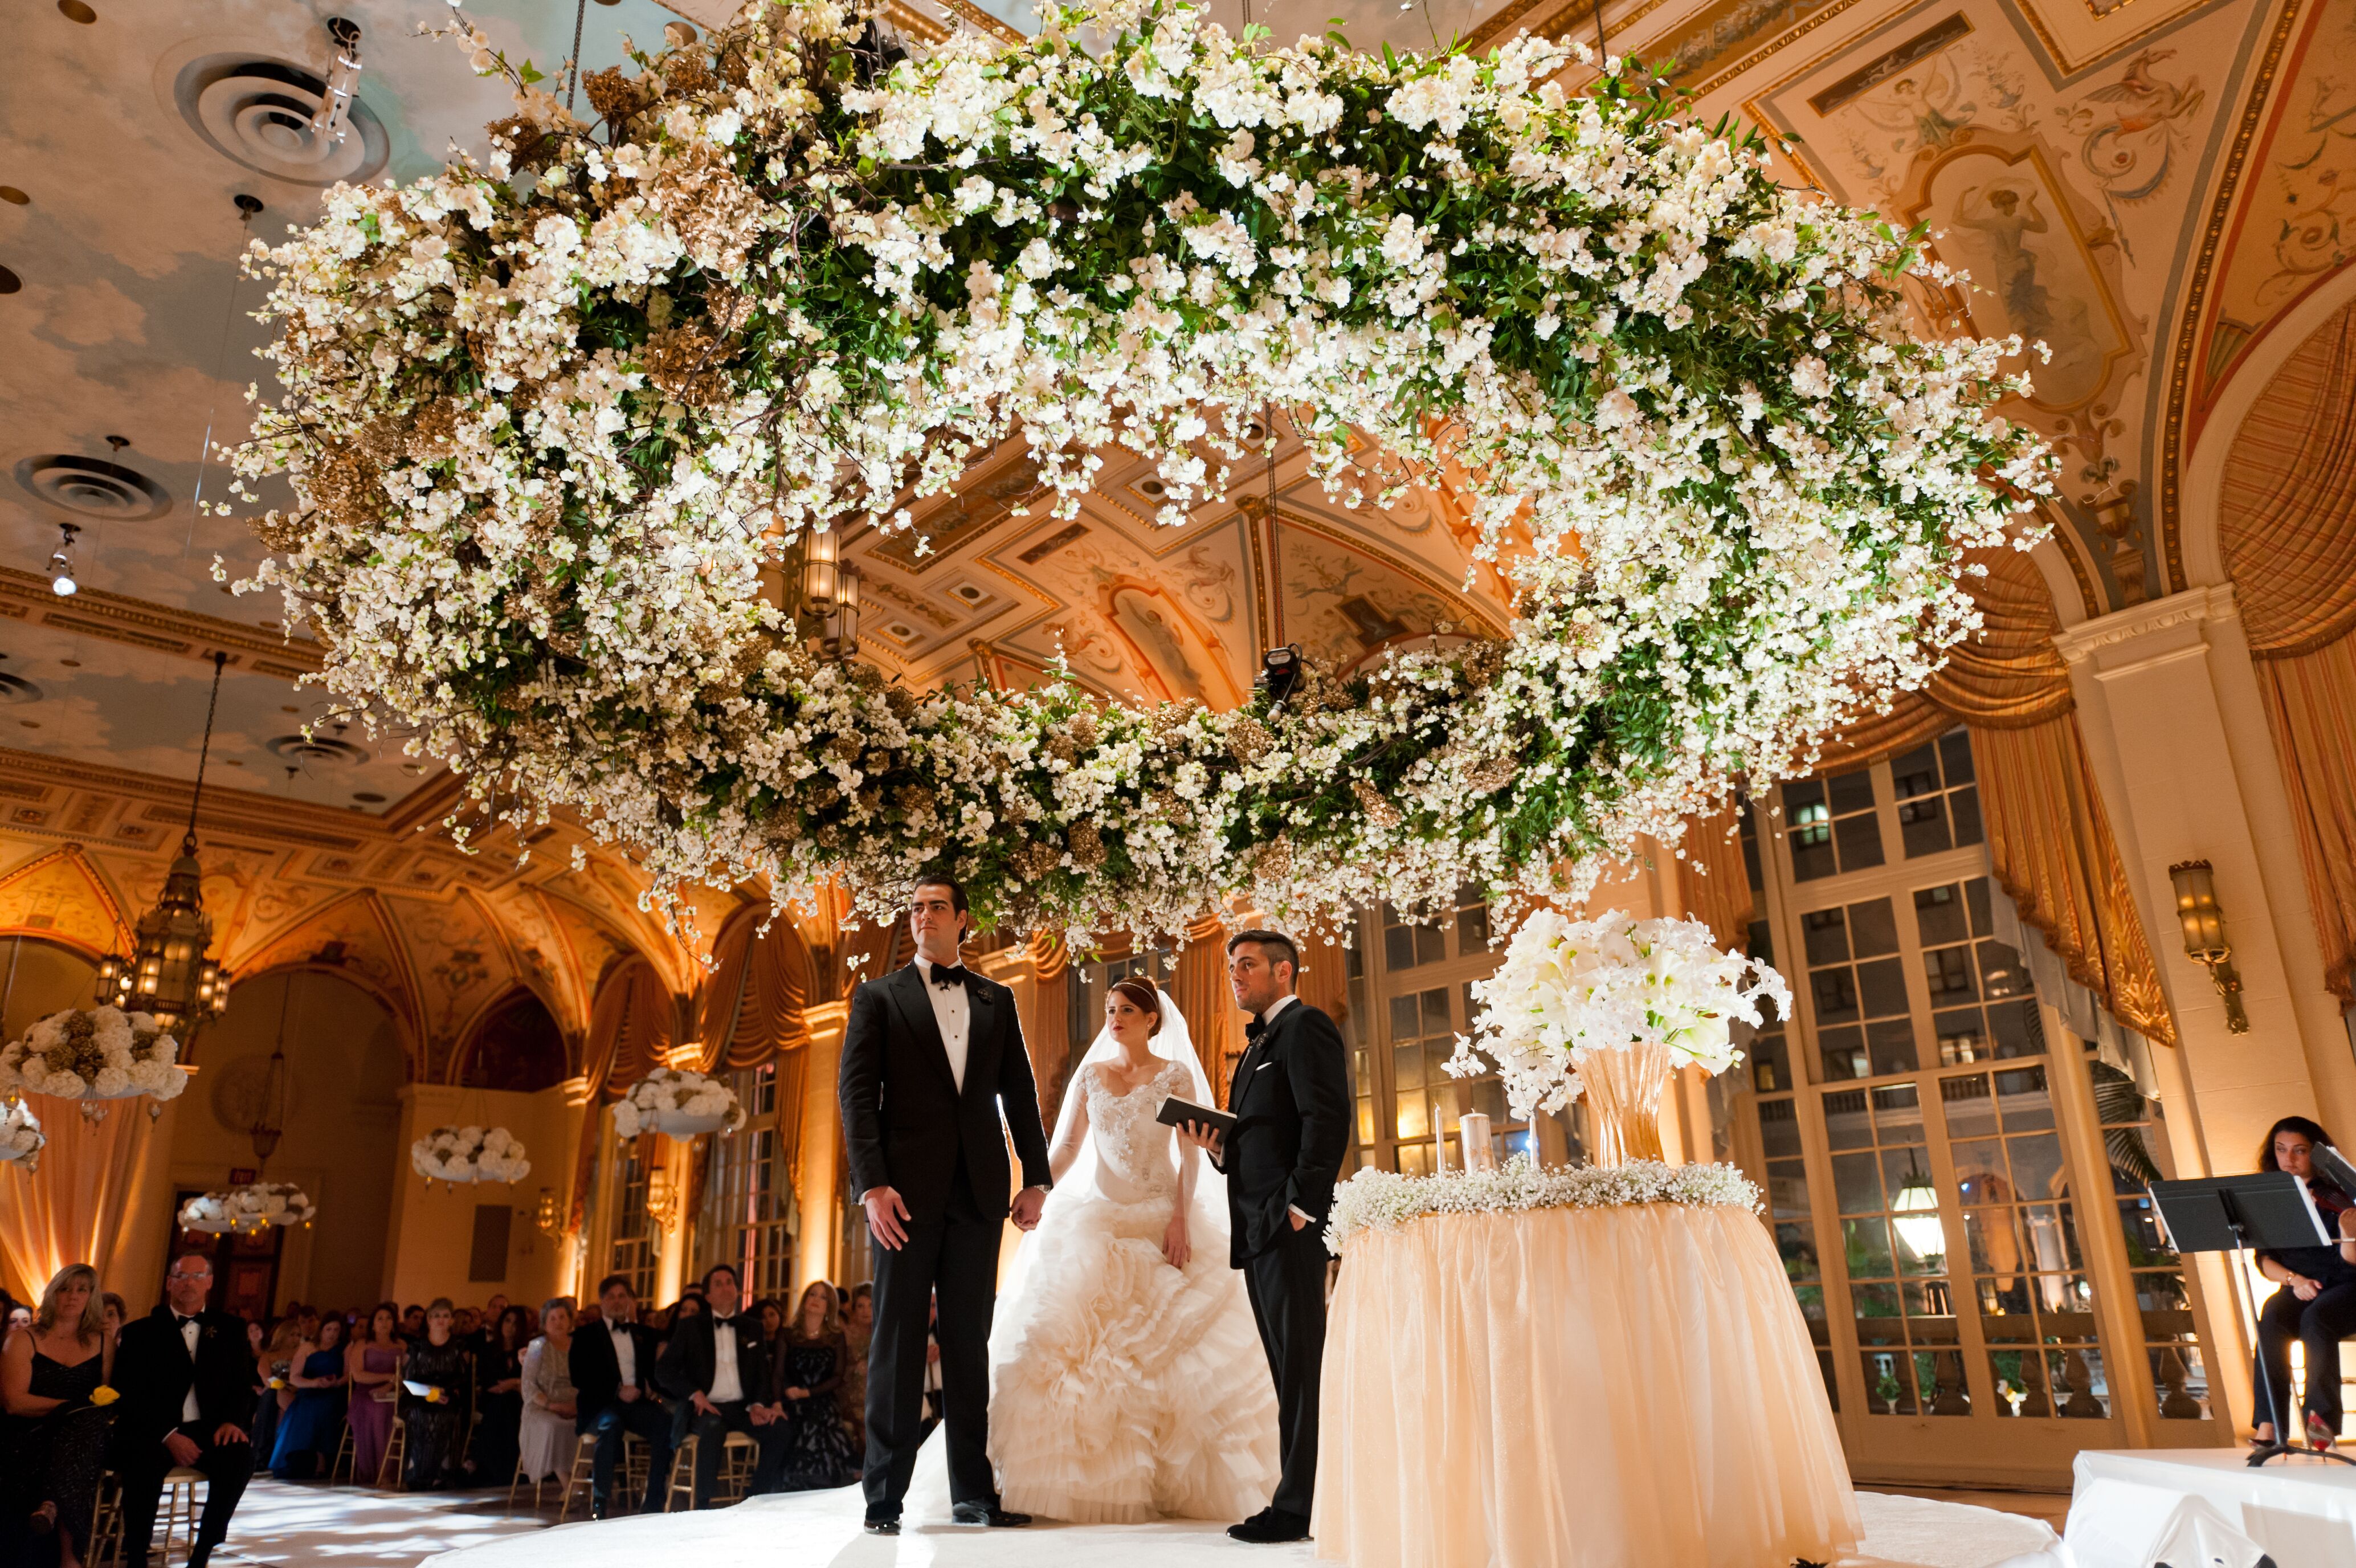 A Lavish Lotus-Inspired Wedding at the Breakers in Palm Beach, Florida